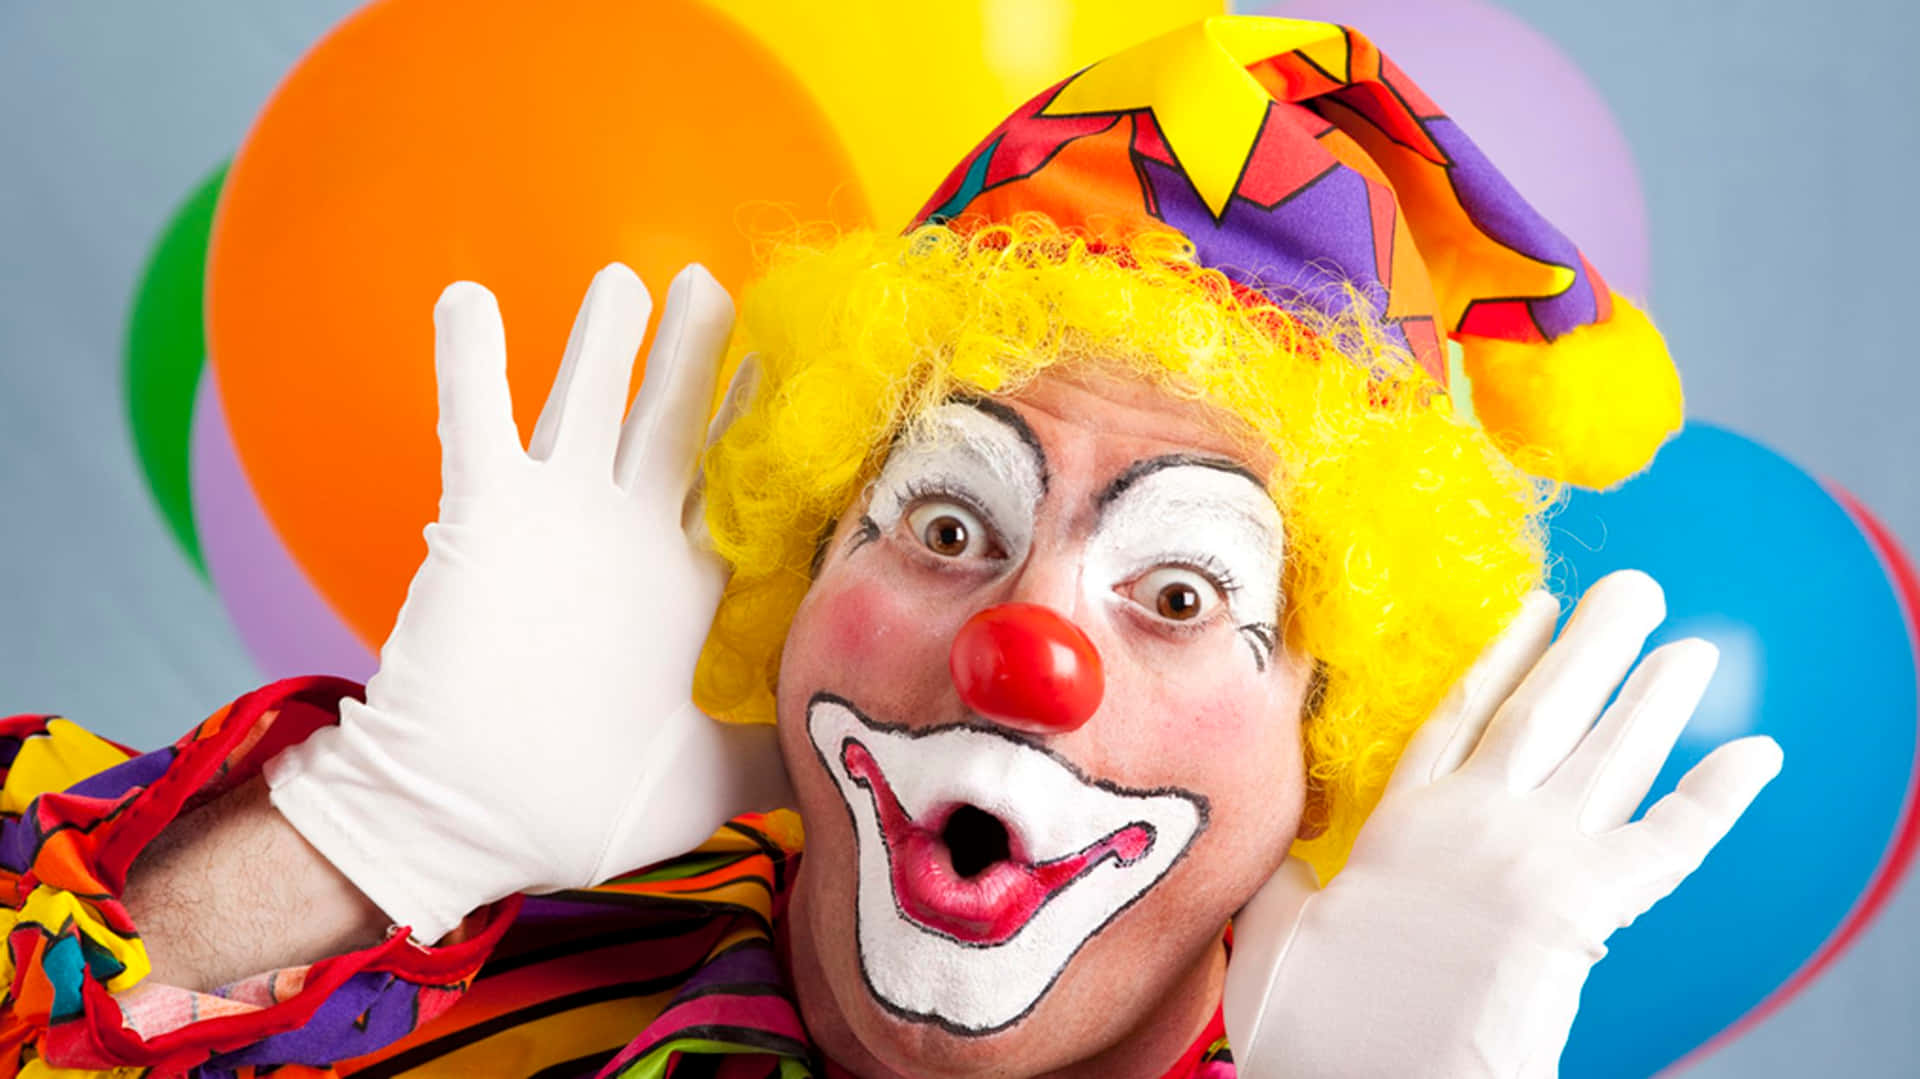 Funny Clown Live Act Pictures